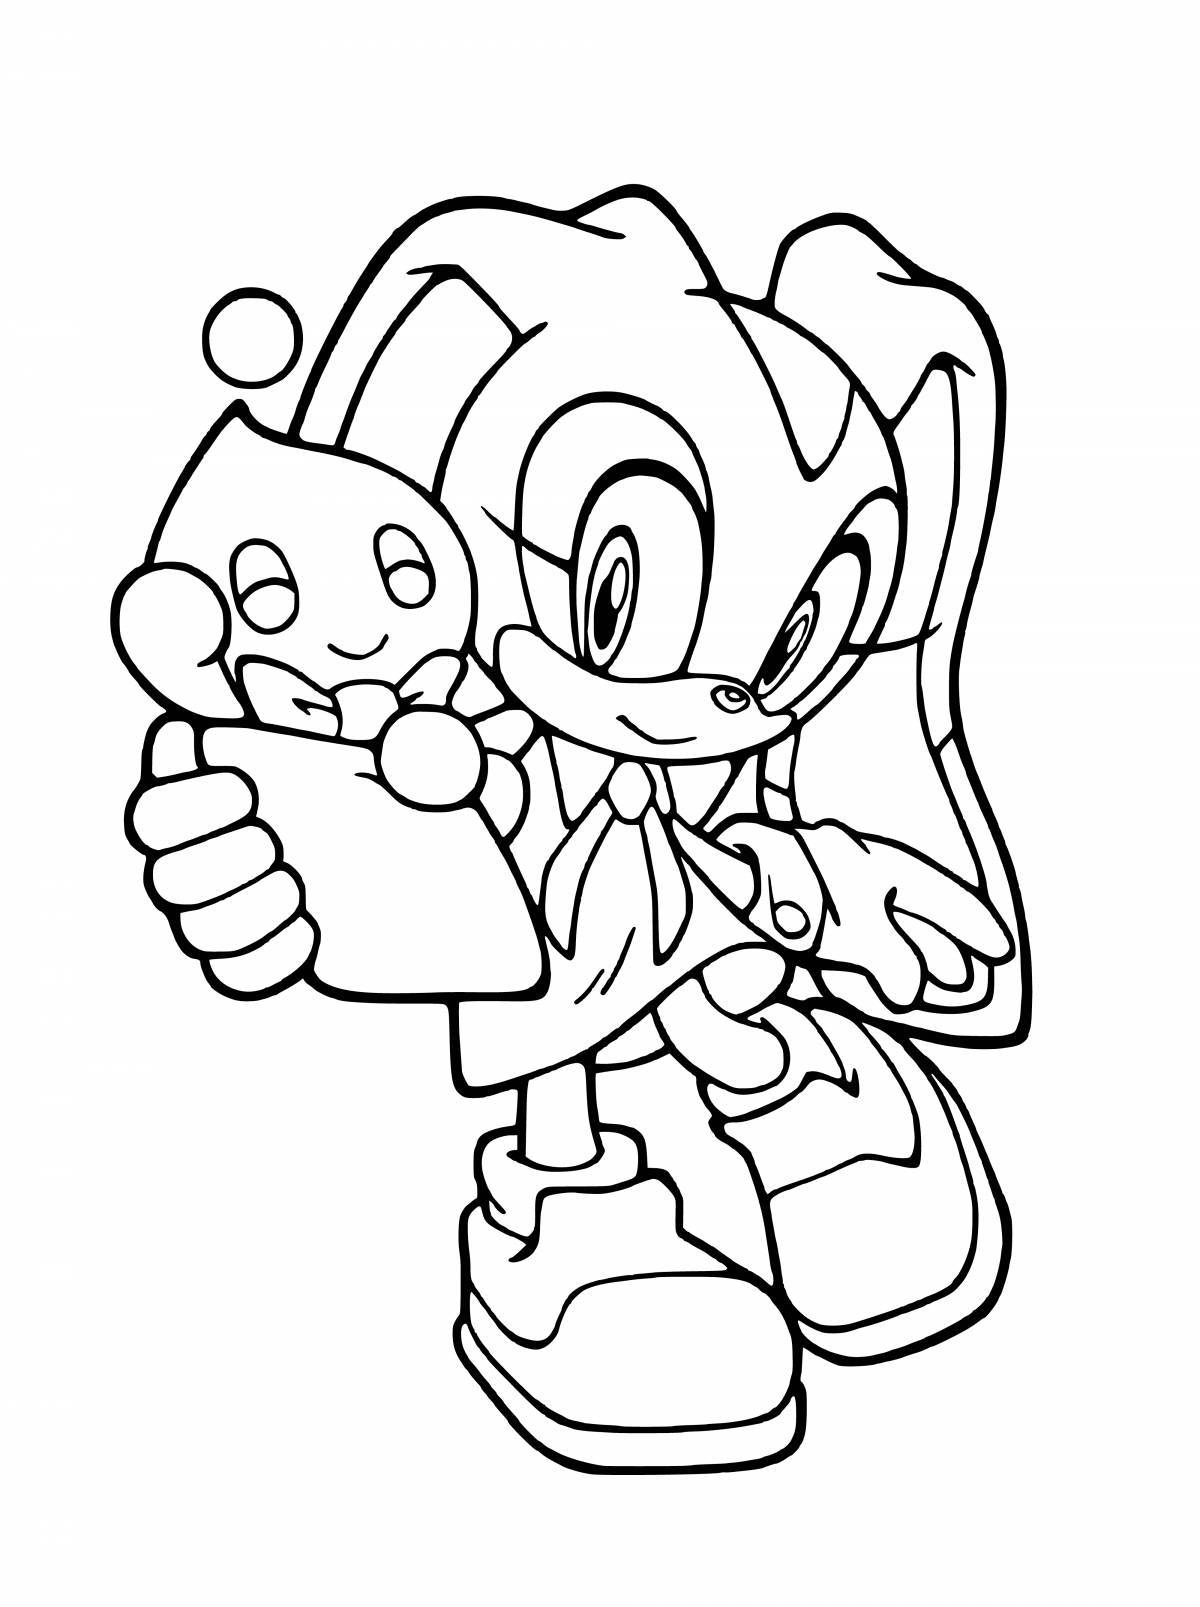 Sonic twinkling coloring book